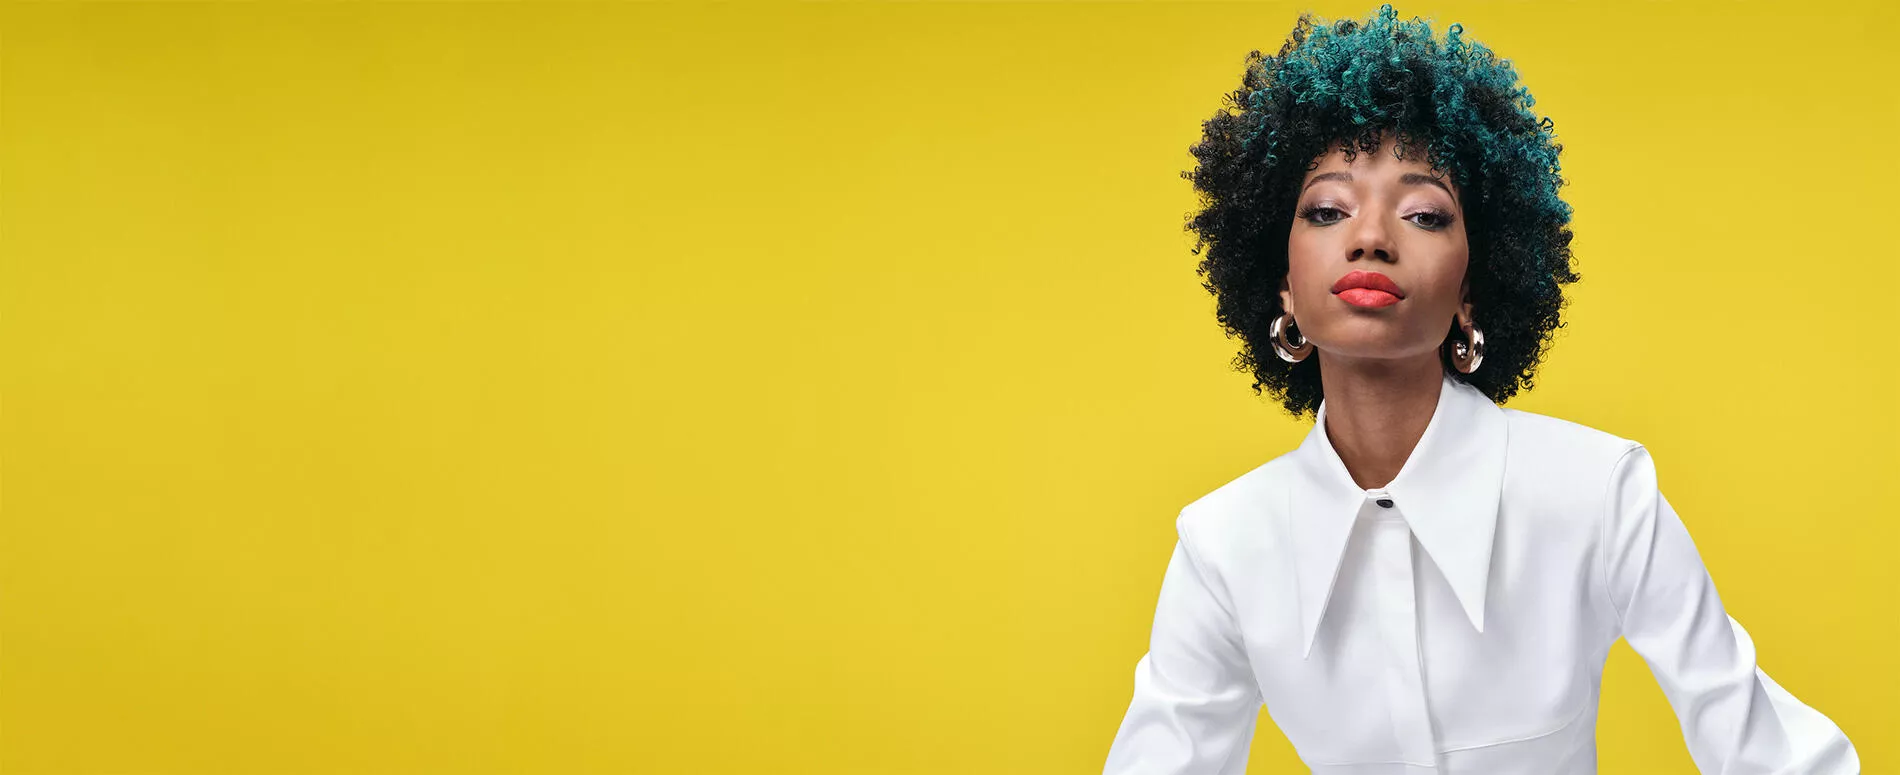 Model with with brunette and green afro hair with contrast blocking color service, on a yellow background